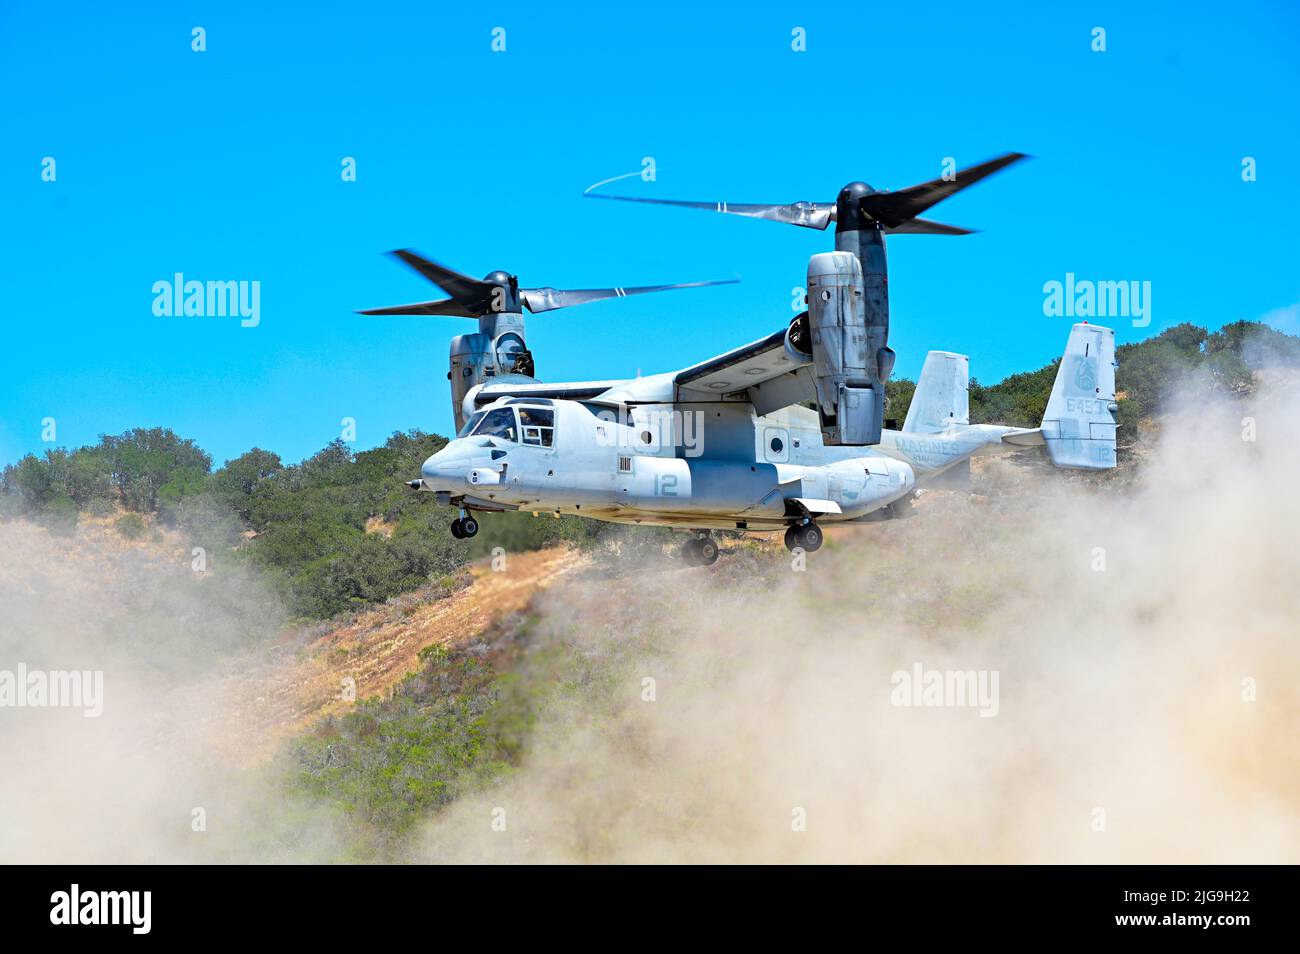 A U.S. Marine Corps MV-22 Osprey lands on a recently repaired runway during  Operation Turning Point on Vandenberg Space Force Base, Calif., June 16,  2022. The Osprey quickly touched down, loaded personnel, and took off in  order to test the runway for viability following repairs to it. (U.S. Space  Force Photo by Airman 1st Class Rocio Romo) Stock Photo